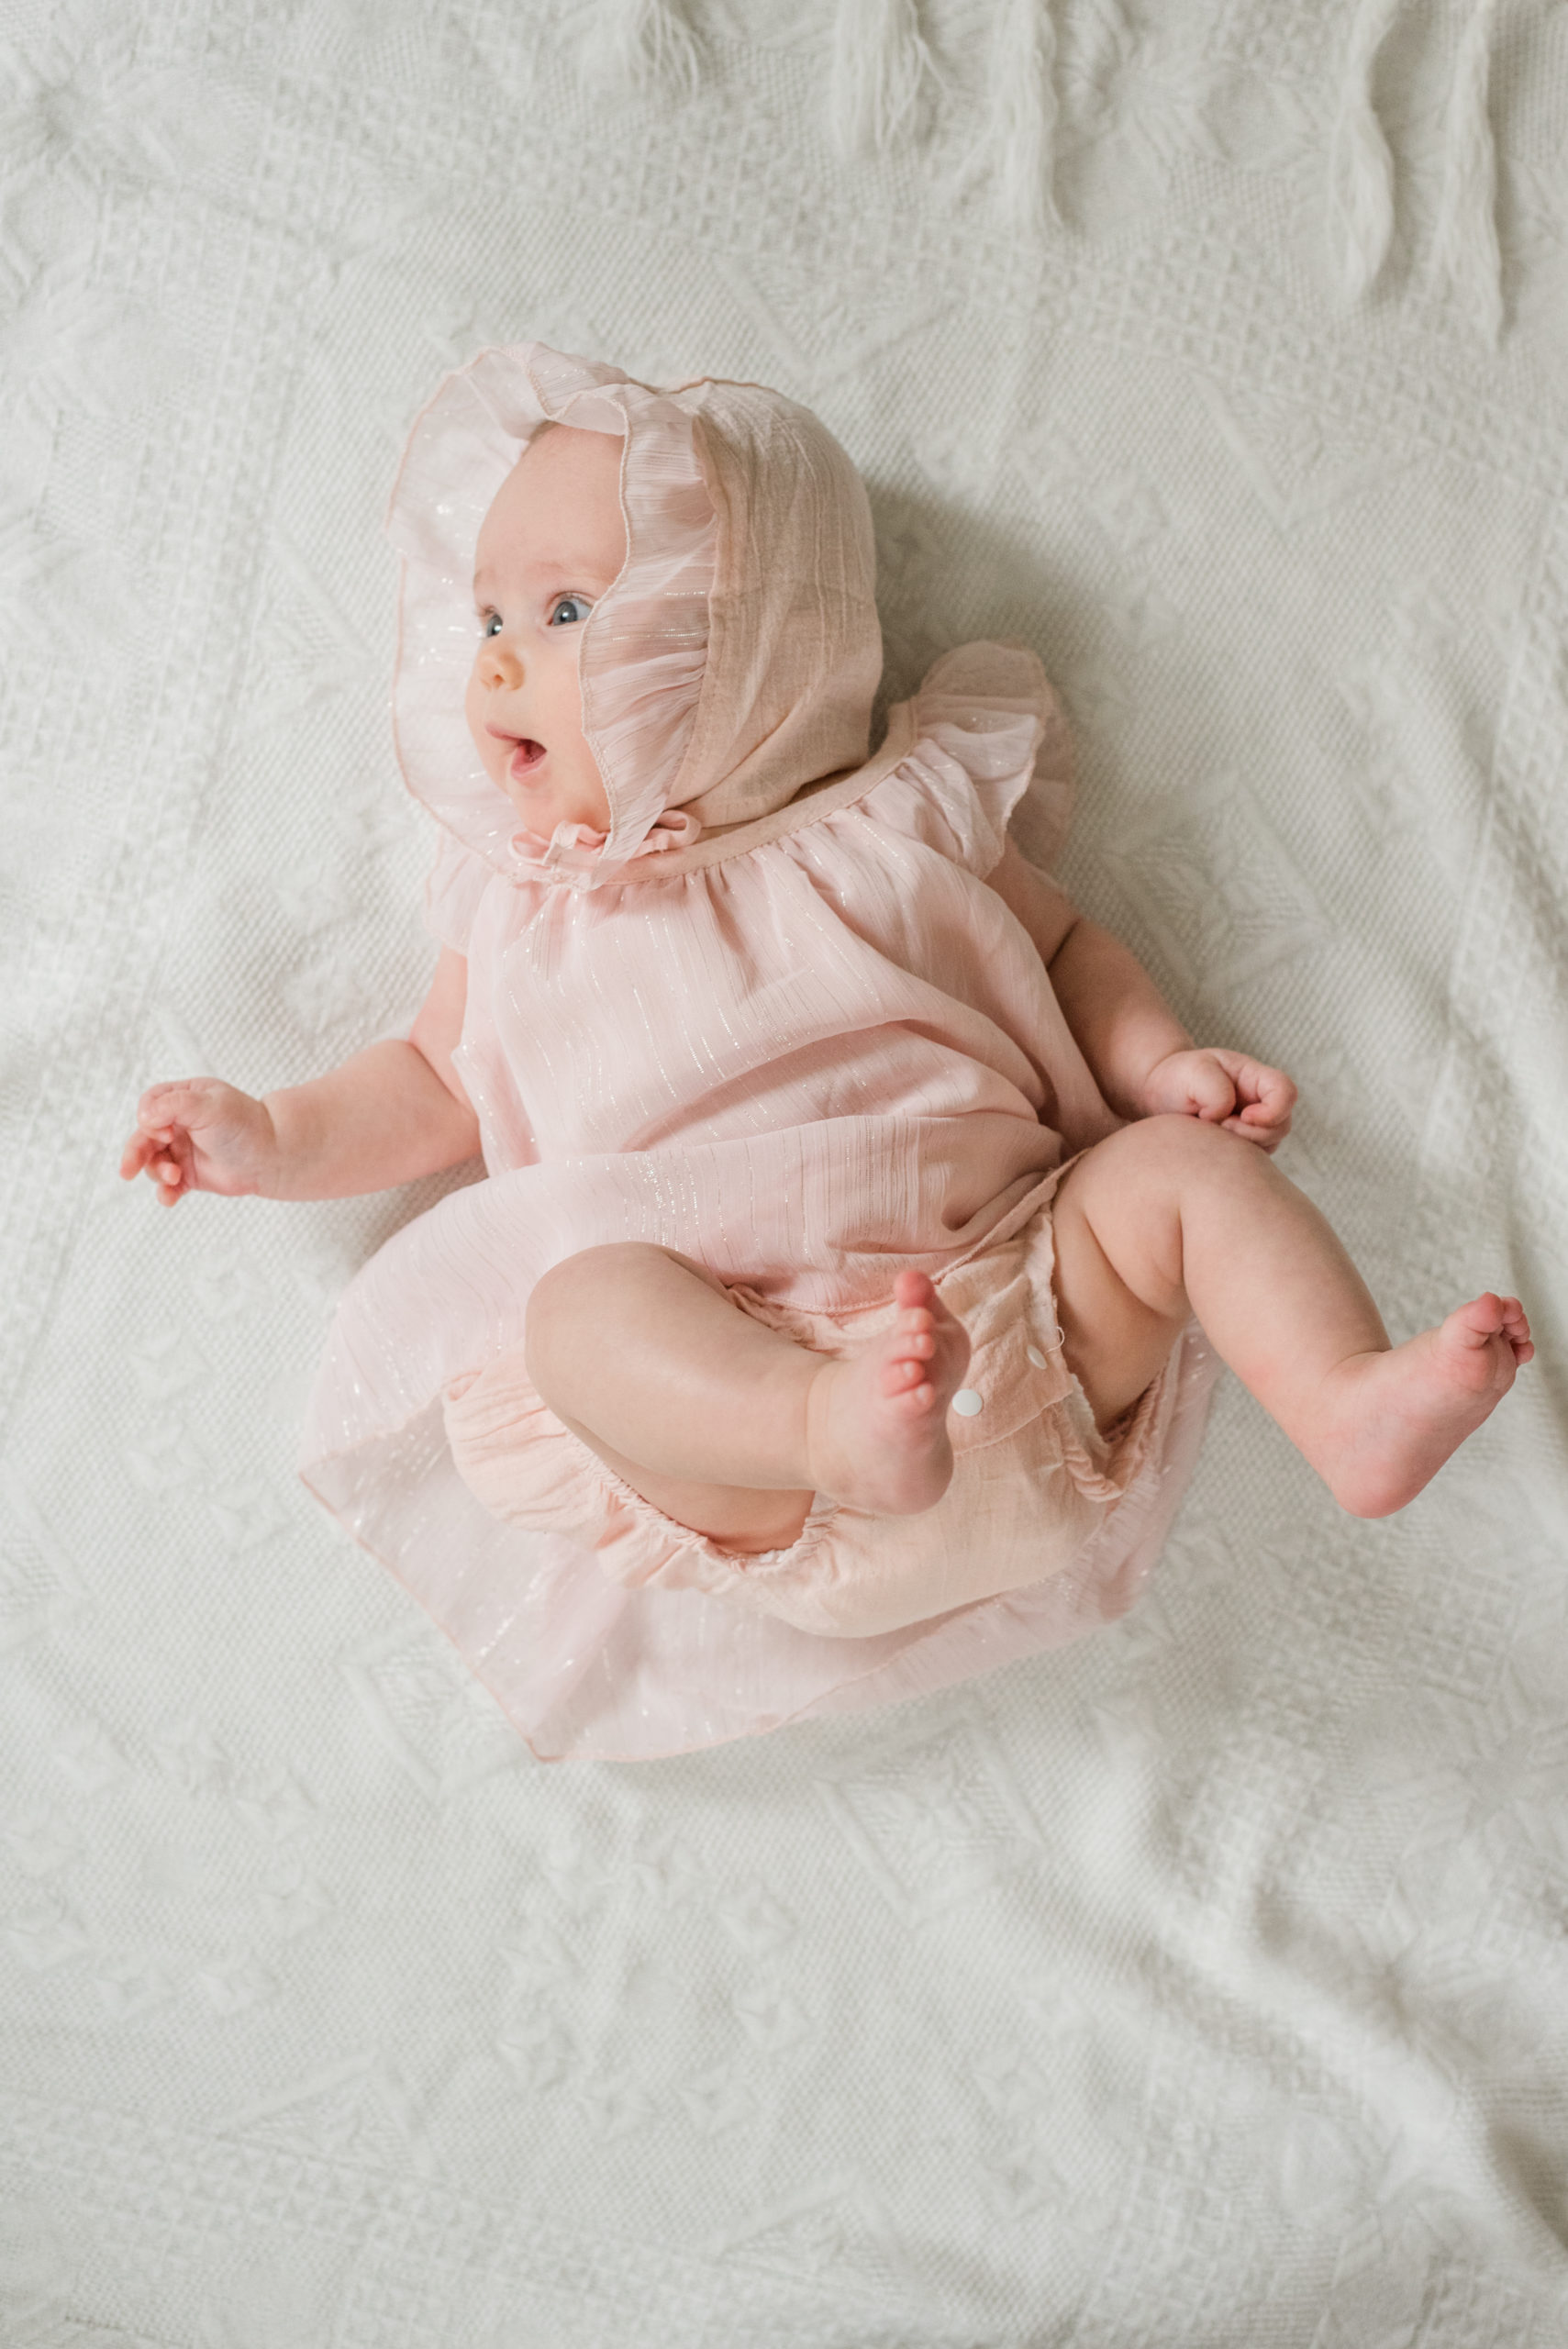 Olivia 3 Months Old - Sweet Williams Photography is a lifestyle, engagement, and wedding photographer serving the Nashville, Tennessee area and destination locations.